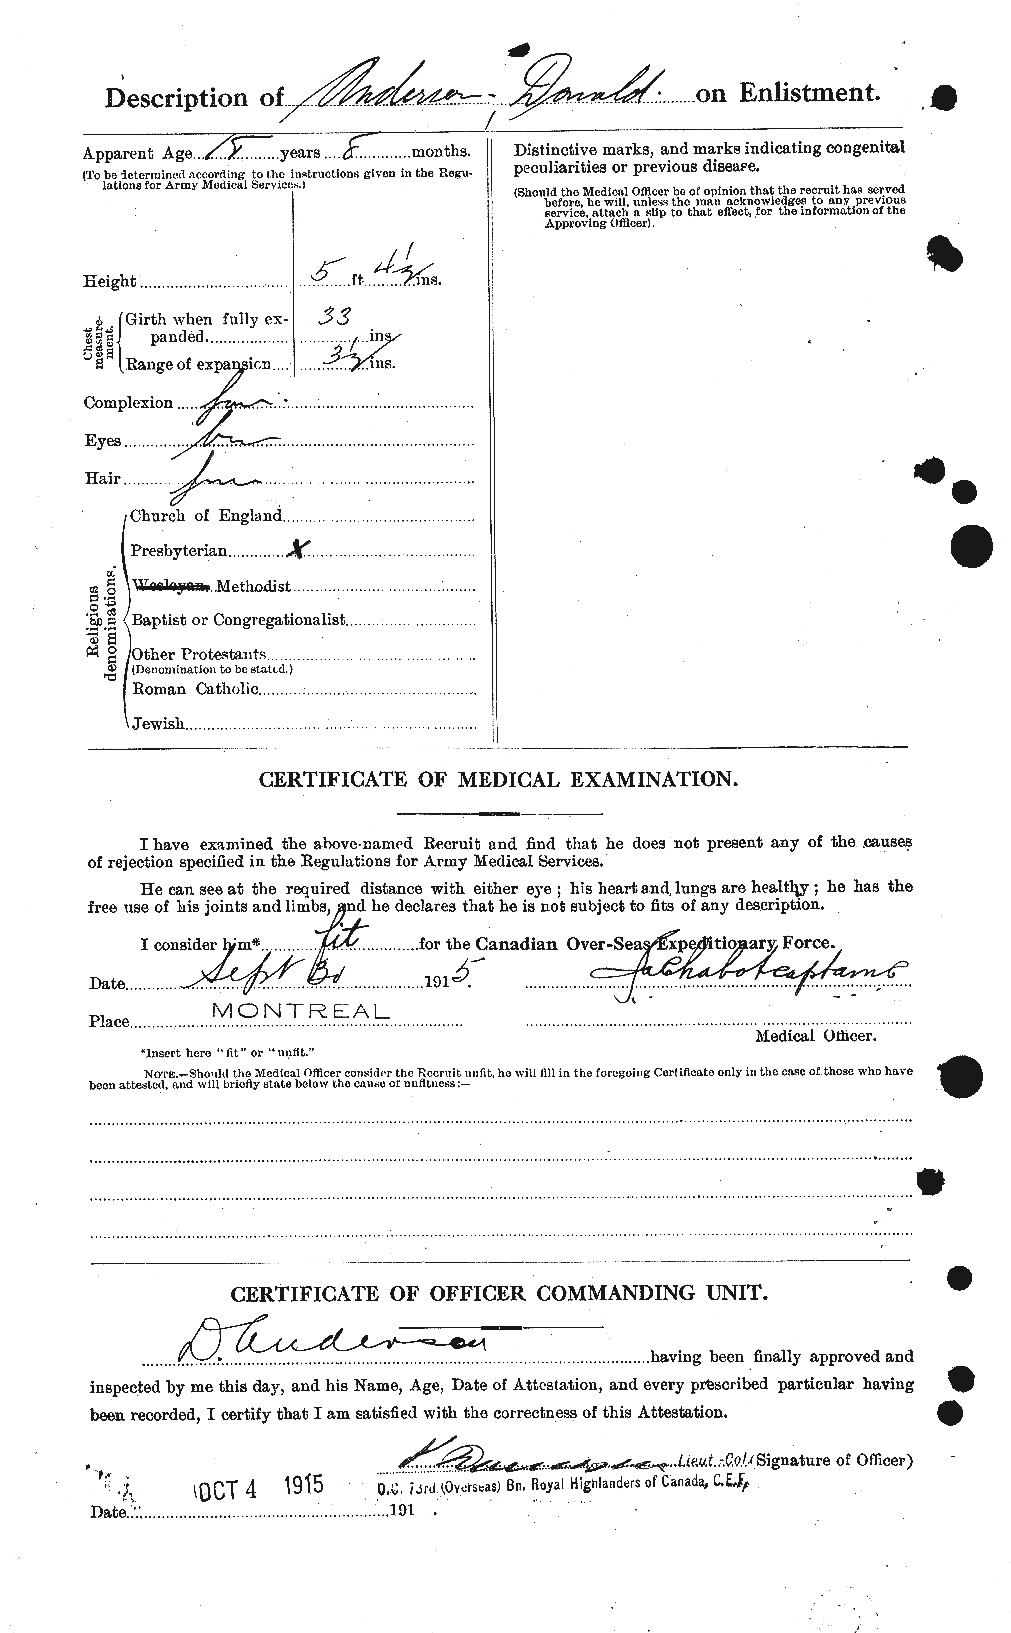 Personnel Records of the First World War - CEF 209984b